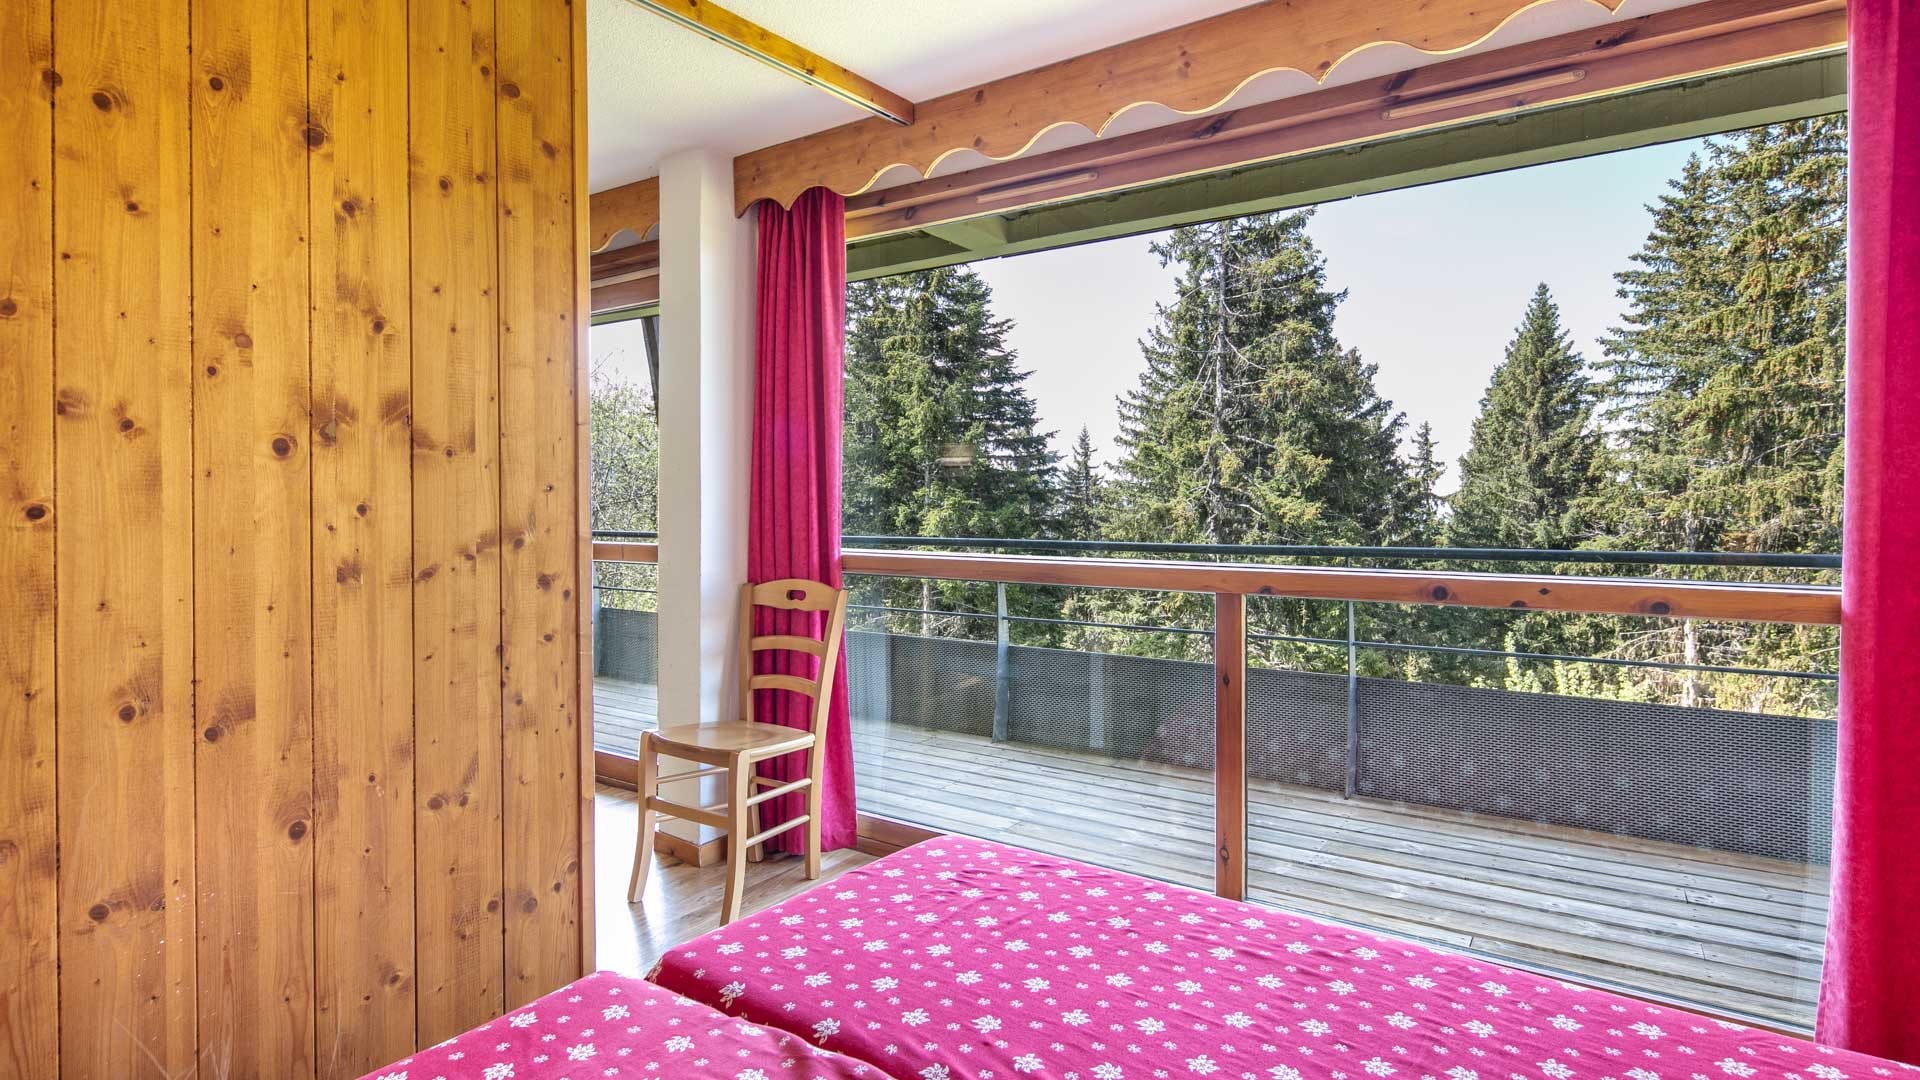 2 rooms 6 persons mountain view - Apartements V du Bachat Asters E11 - Appt 6 pers - Chamrousse